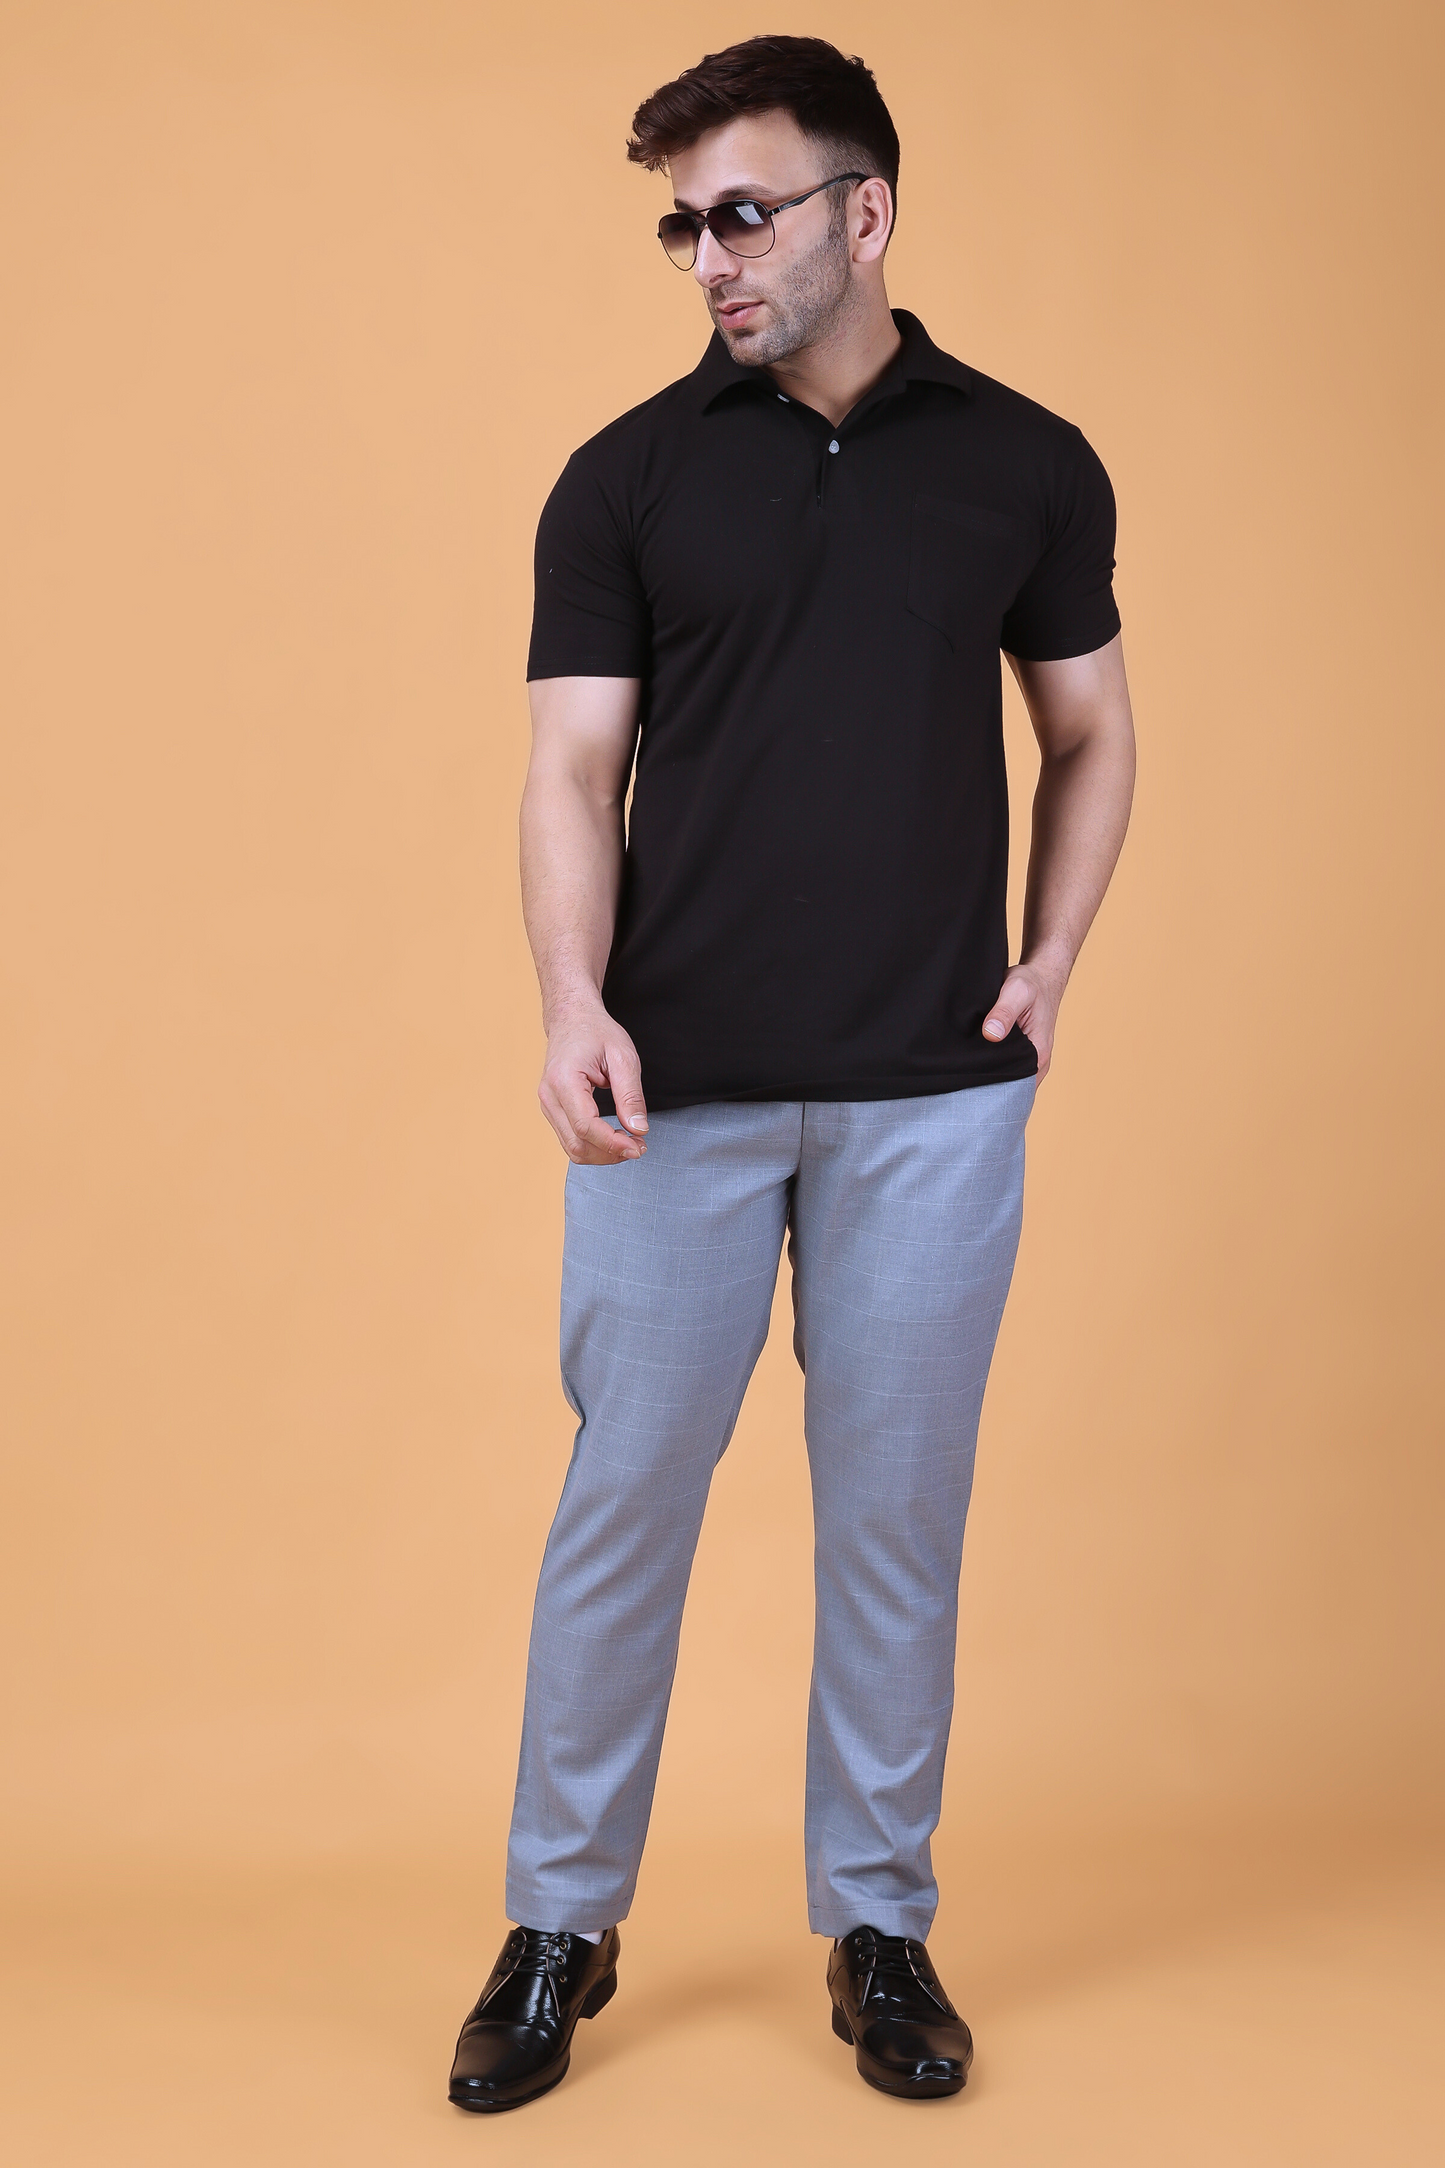 Grey Checked Comfort Fit Trousers